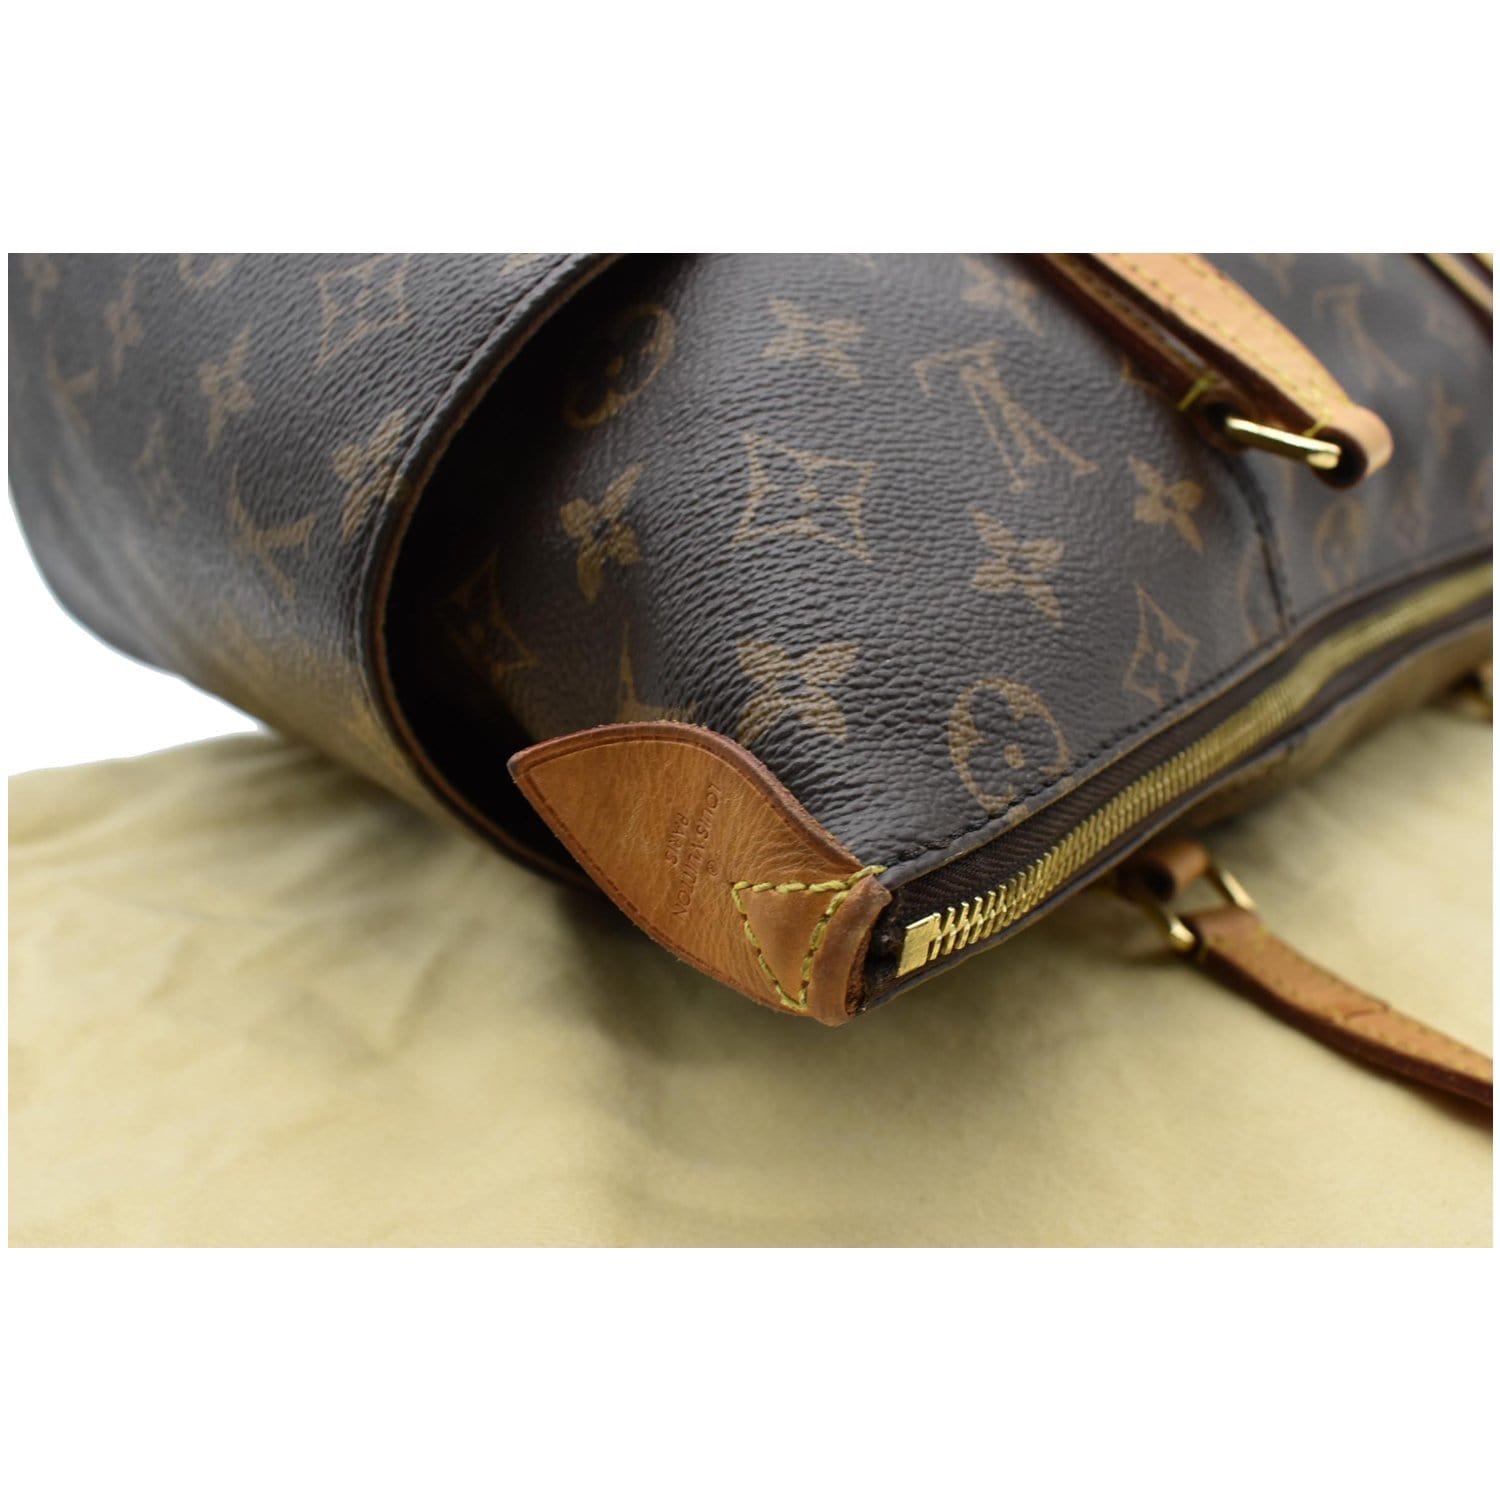 Authentic Louis Vuitton Monogram Totally MM Tote Bag